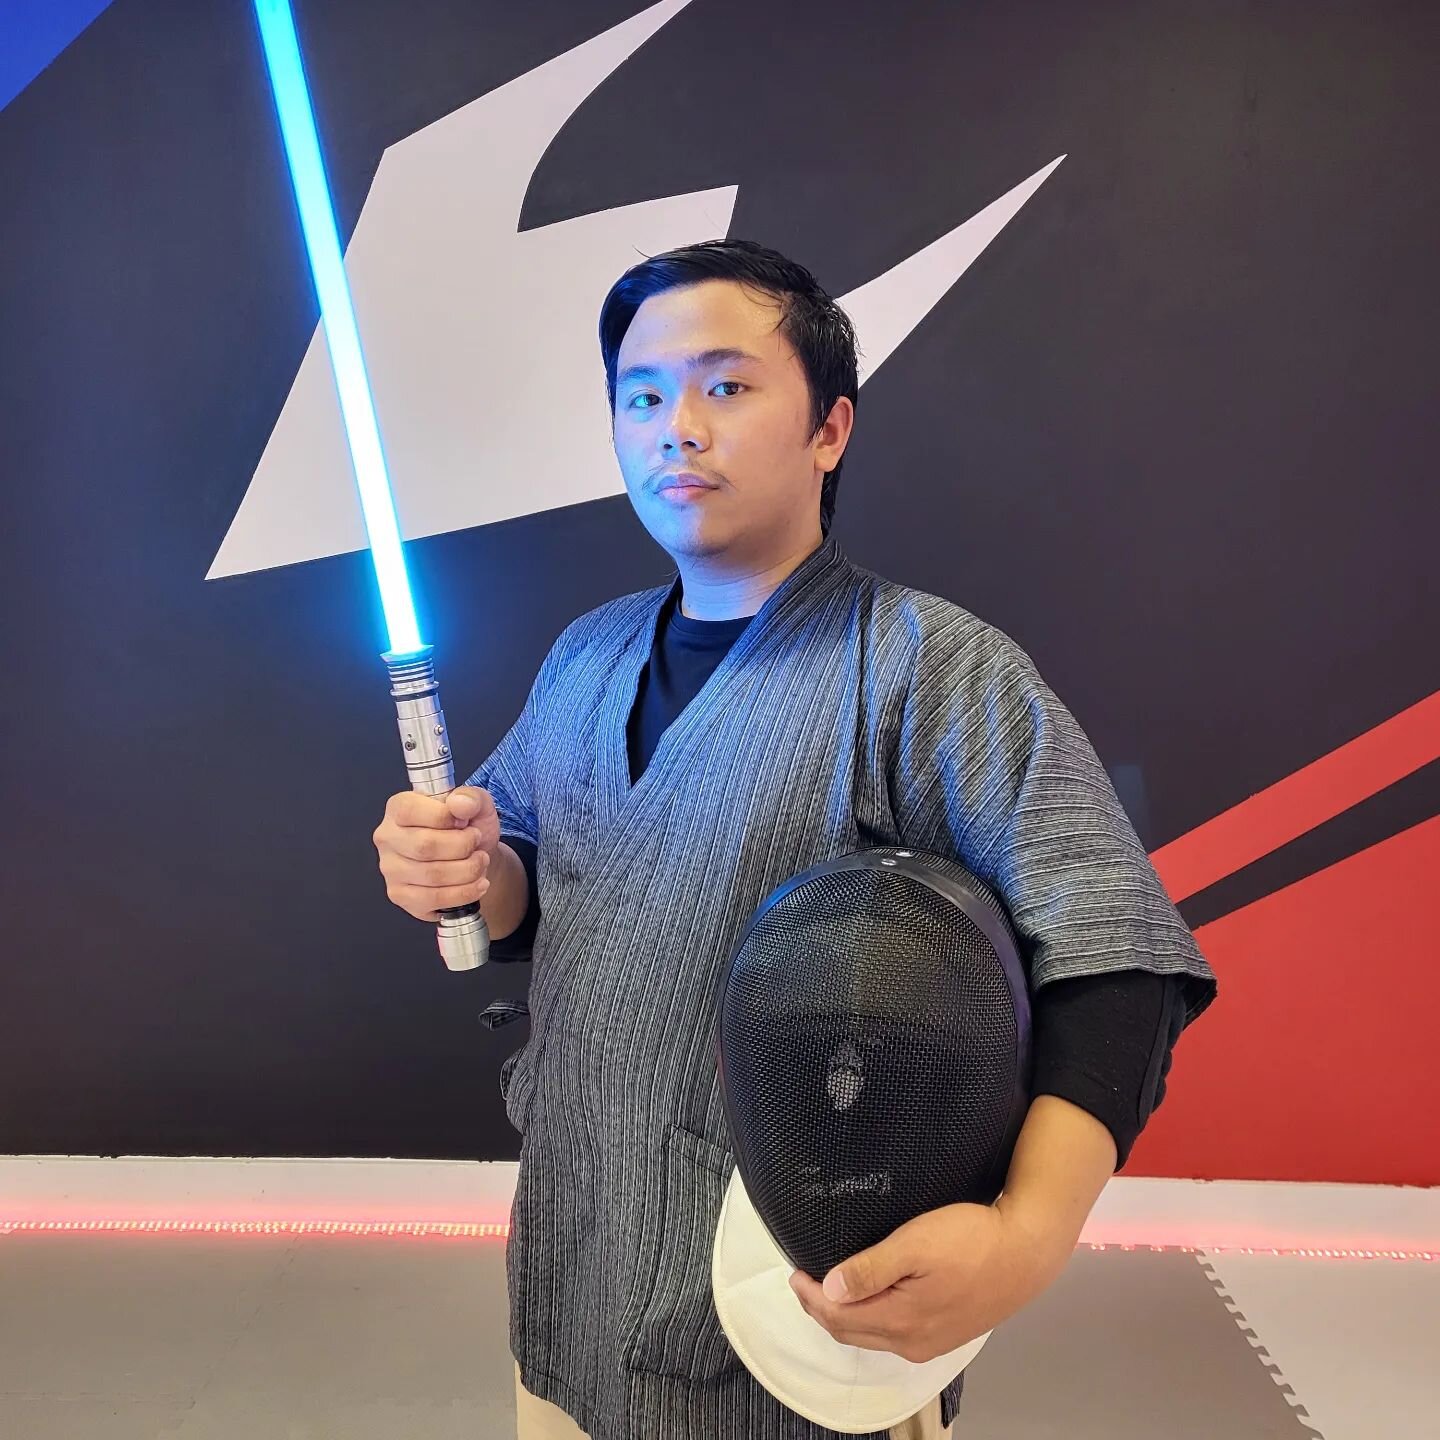 Welcoming our newest member @homie_quan.benobi ! This guy's a fierce fighter who's gonna light up the tournament scene for sure.

Thinking about joining us? Send us a message.

#LightspeedSaber #jedi